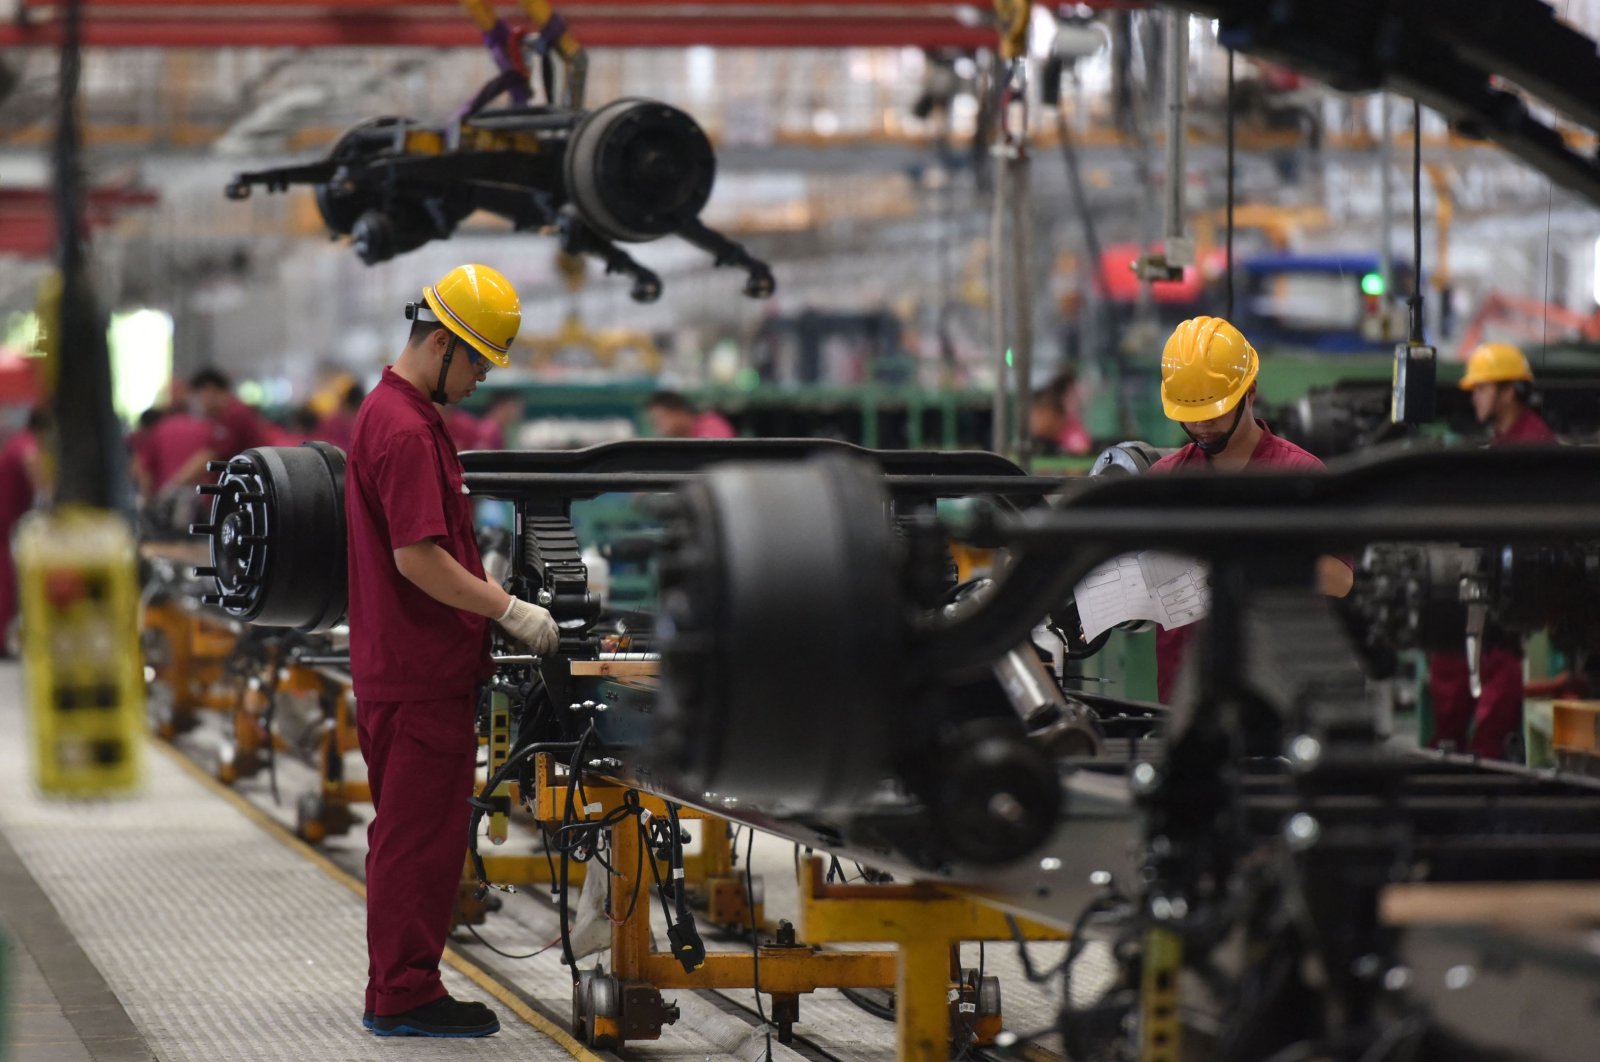 Employees work on an assembly line producing trucks at a factory in Fuyang in Anhui province, eastern China, July 15, 2022. (AFP Photo)